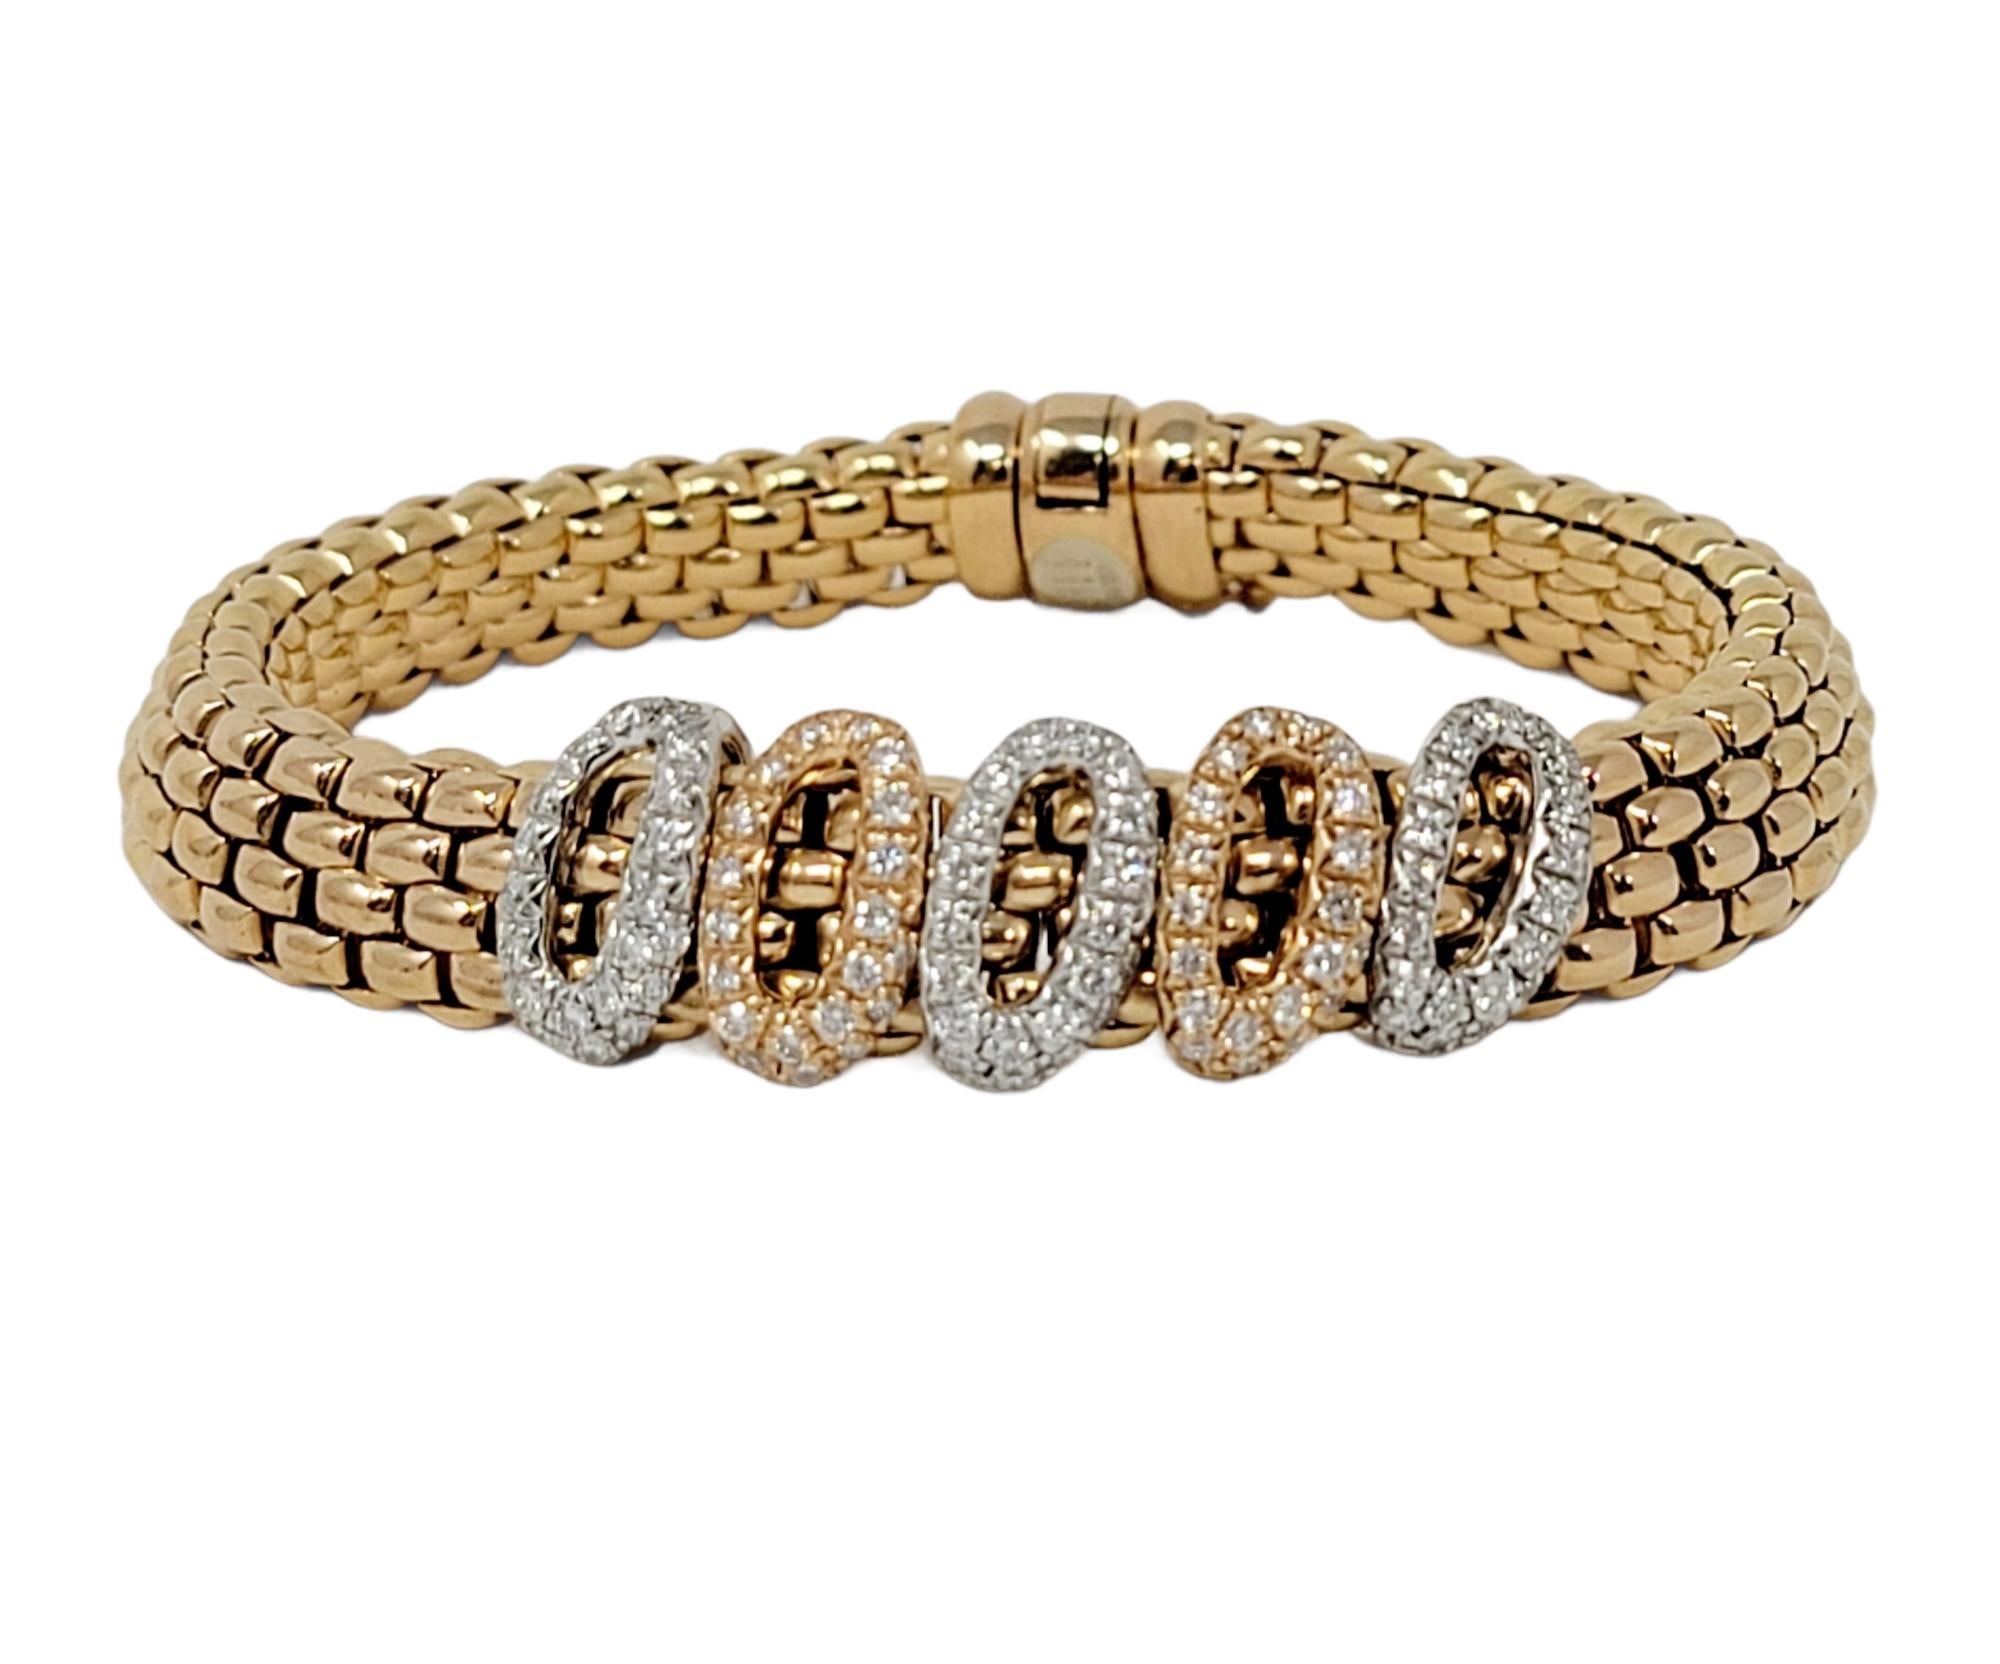 Brighten up your wrist with this gorgeous glittering pave diamond station bracelet by FOPE. Featuring 100 shimmering diamonds and a multi-tone gold setting, the flexible mesh design of this beautiful piece offers a comfortable elegance that sparkles